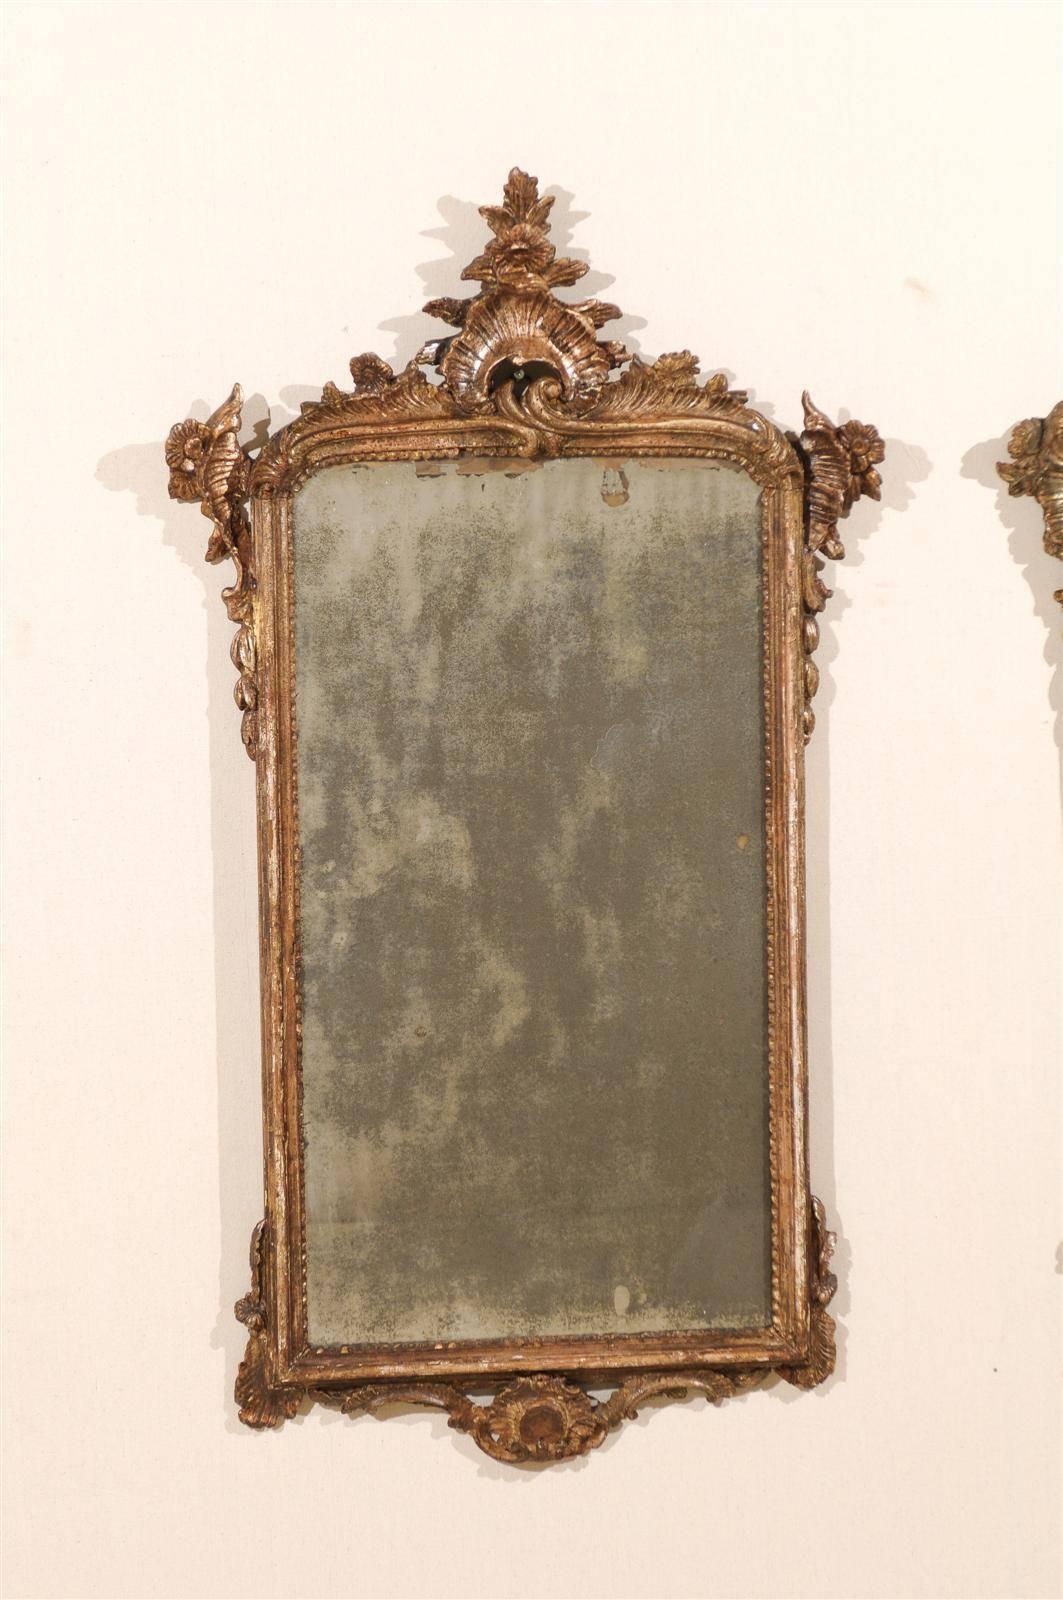 A pair of 18th century elegant Italian mirrors. This pair of Italian wooden Rococo style mirrors features nicely carved crests with floral and acanthus leaf motifs. The mirrors have their original hand-silvered glass. The frame has beaded motifs on